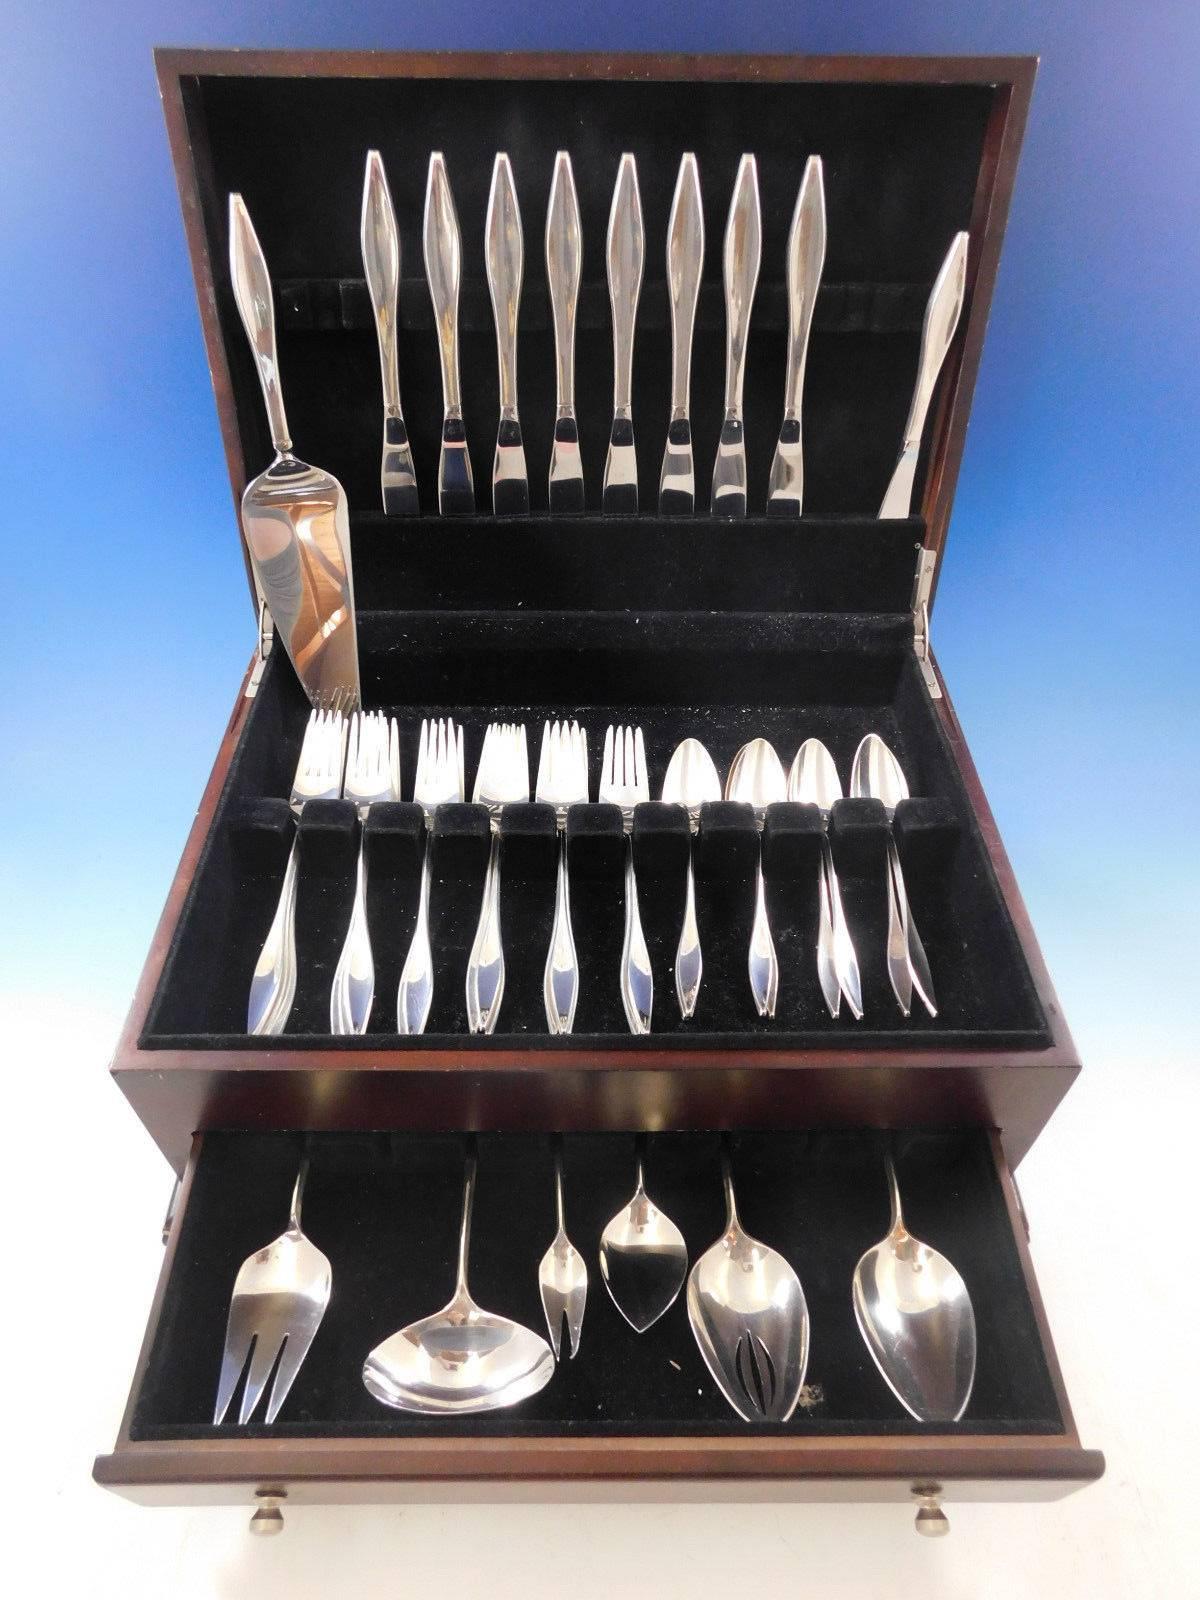 Lark by Reed & Barton sterling silver flatware set, 40 pieces. This set includes:

8 Knives, 9